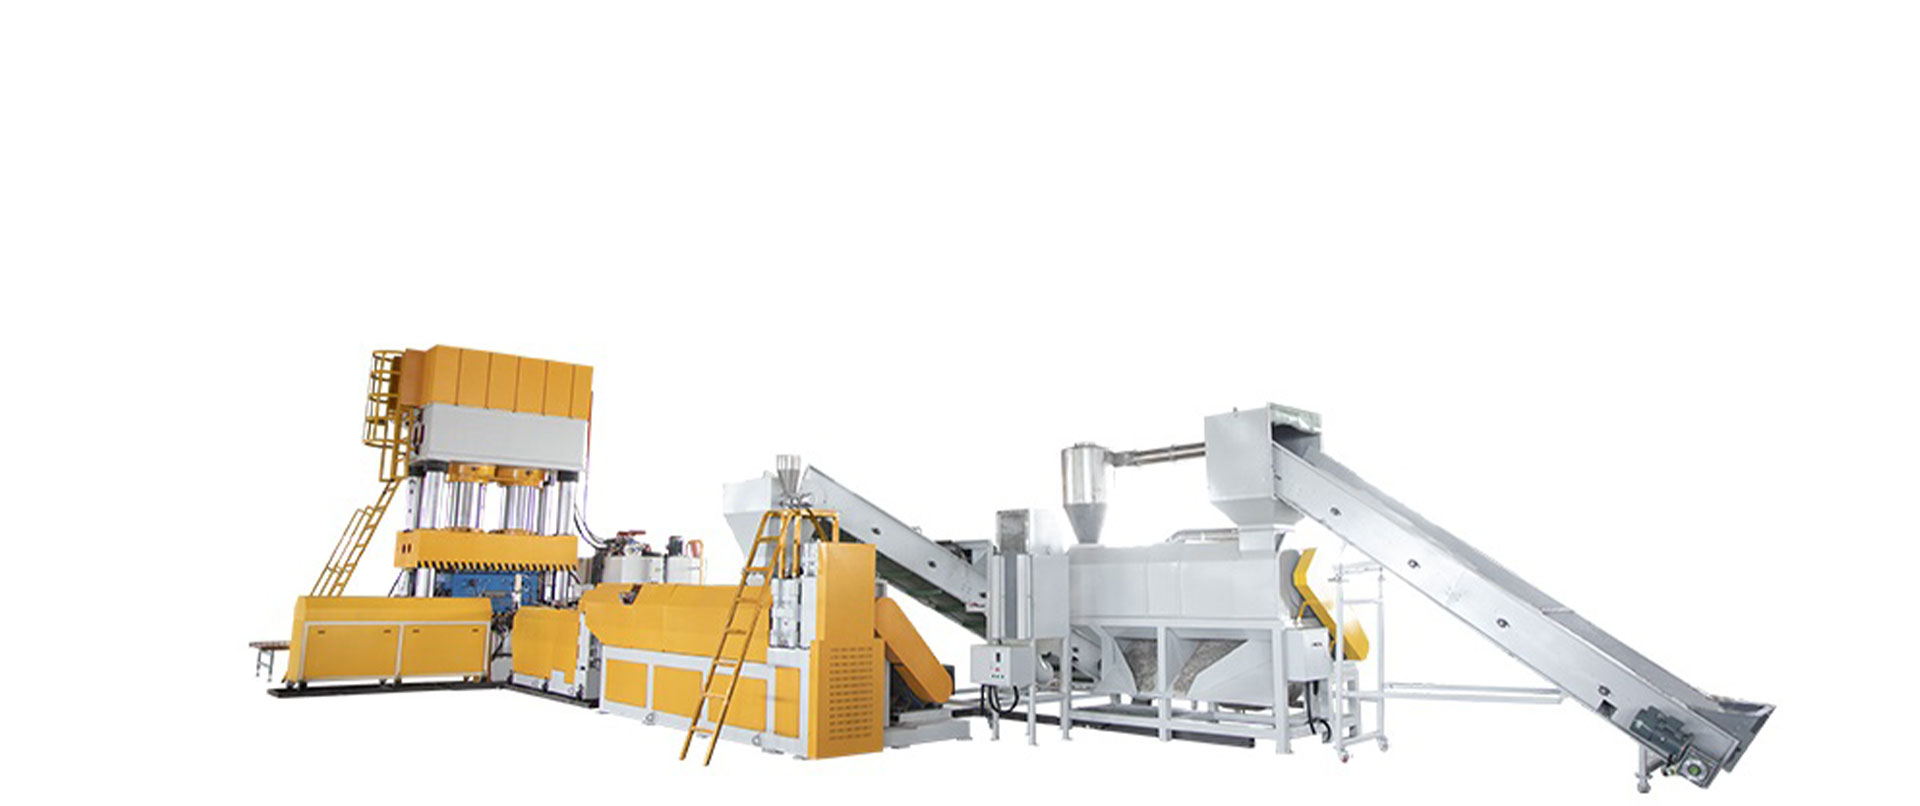 Guowang Eco Technology Specializes in Plastic & Textile Recycling Machine